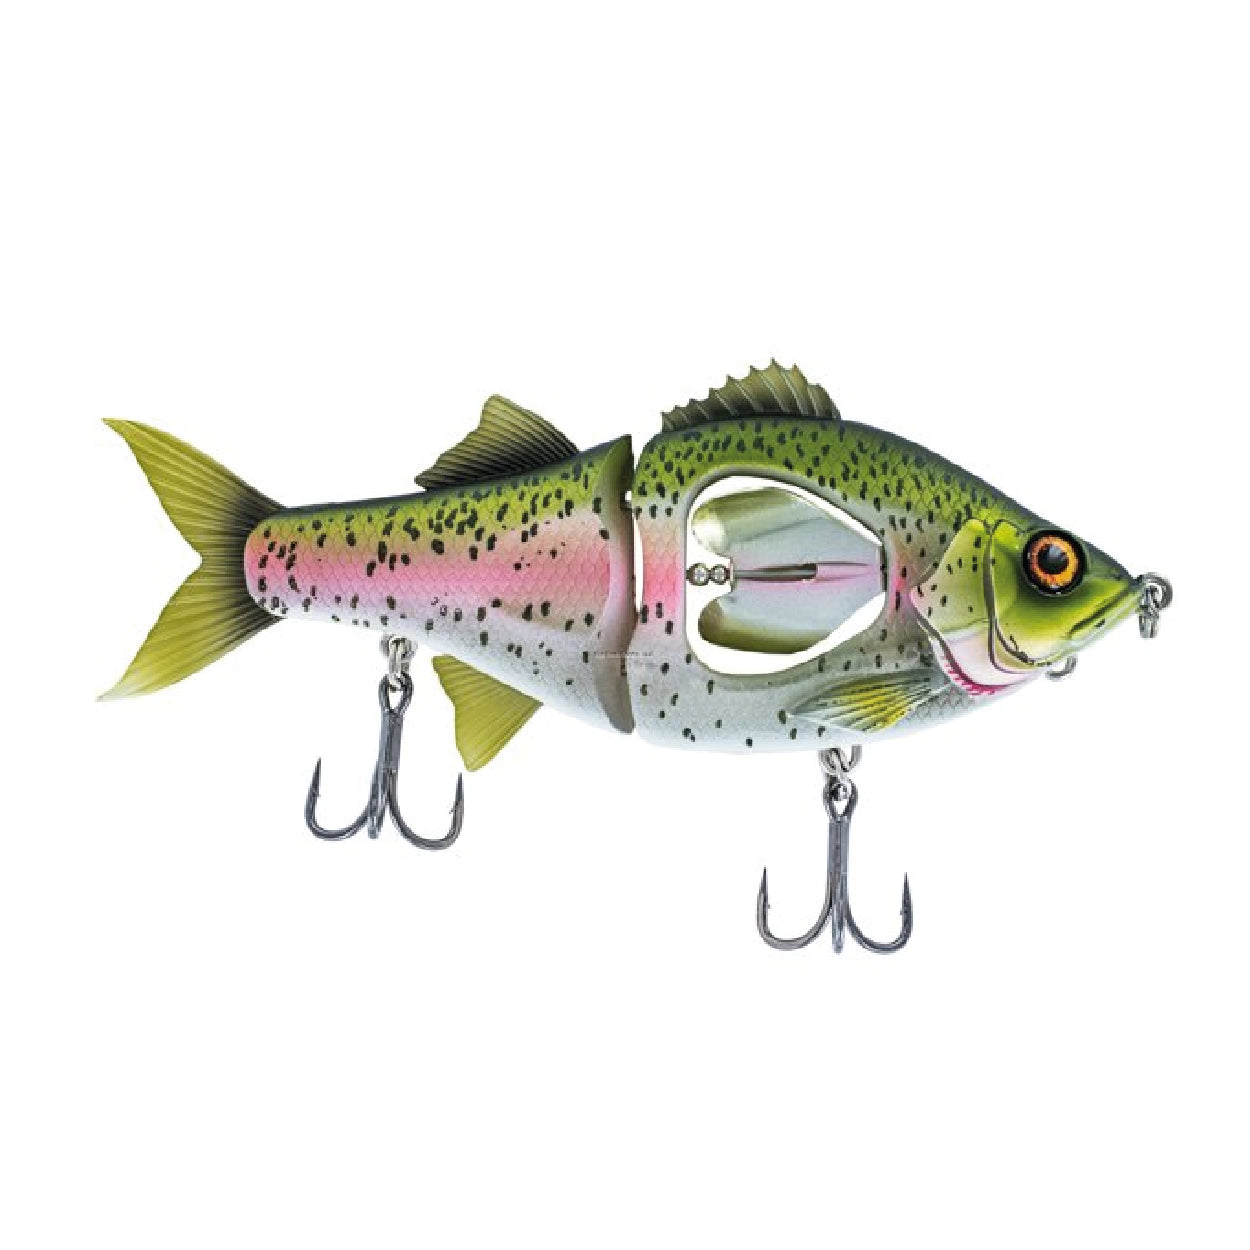 SEÑUELO CHASEBAITS PROP DUSTER GLIDER 5.1"